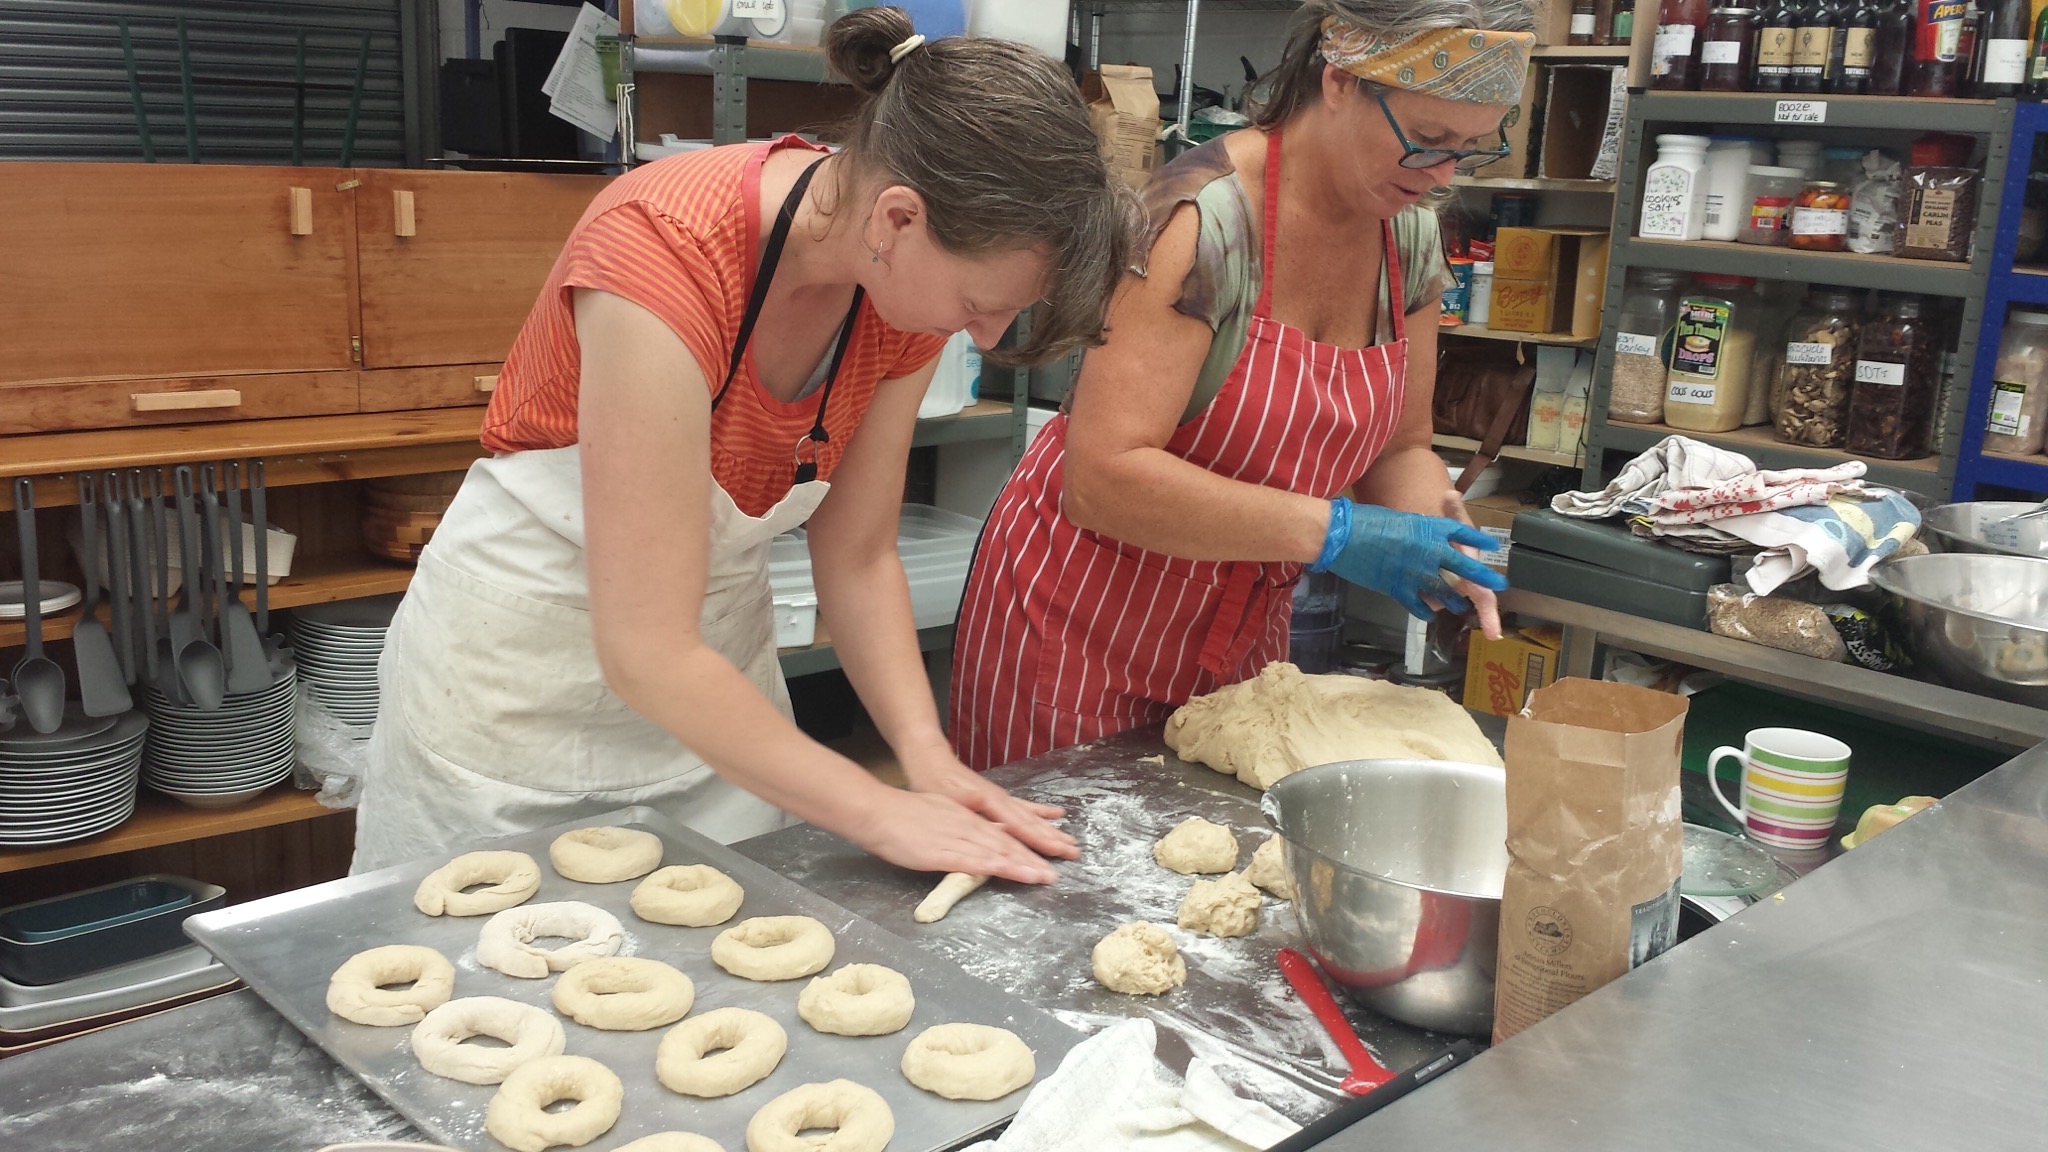 2 cooks laying rings of bagel dough onto a baking tray